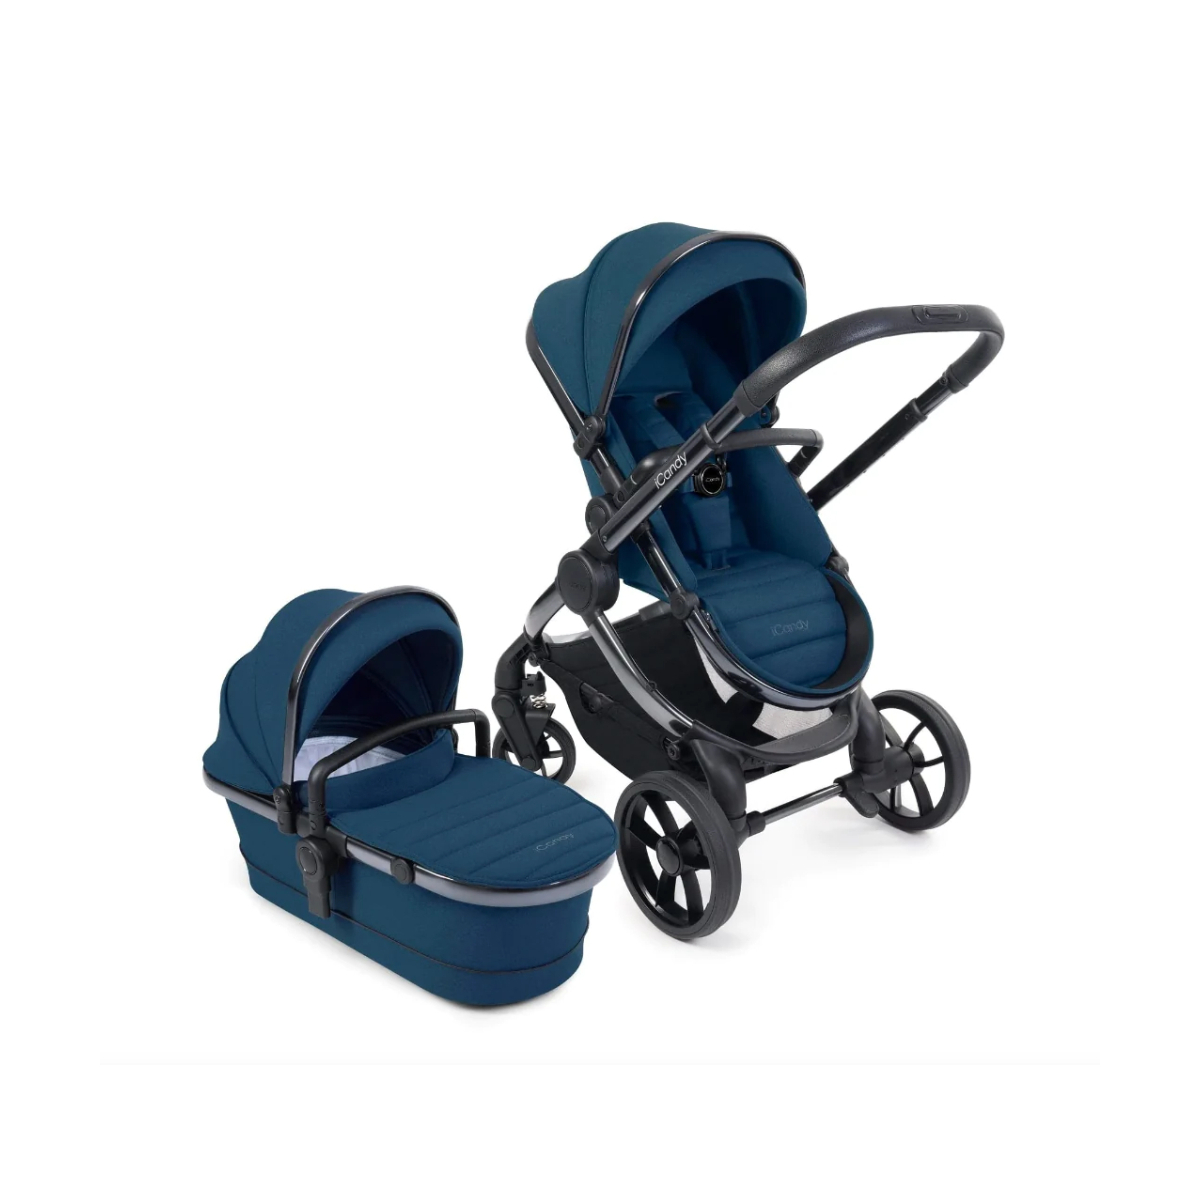 iCandy Peach 7 2 in 1 Combo Pushchair Bundle